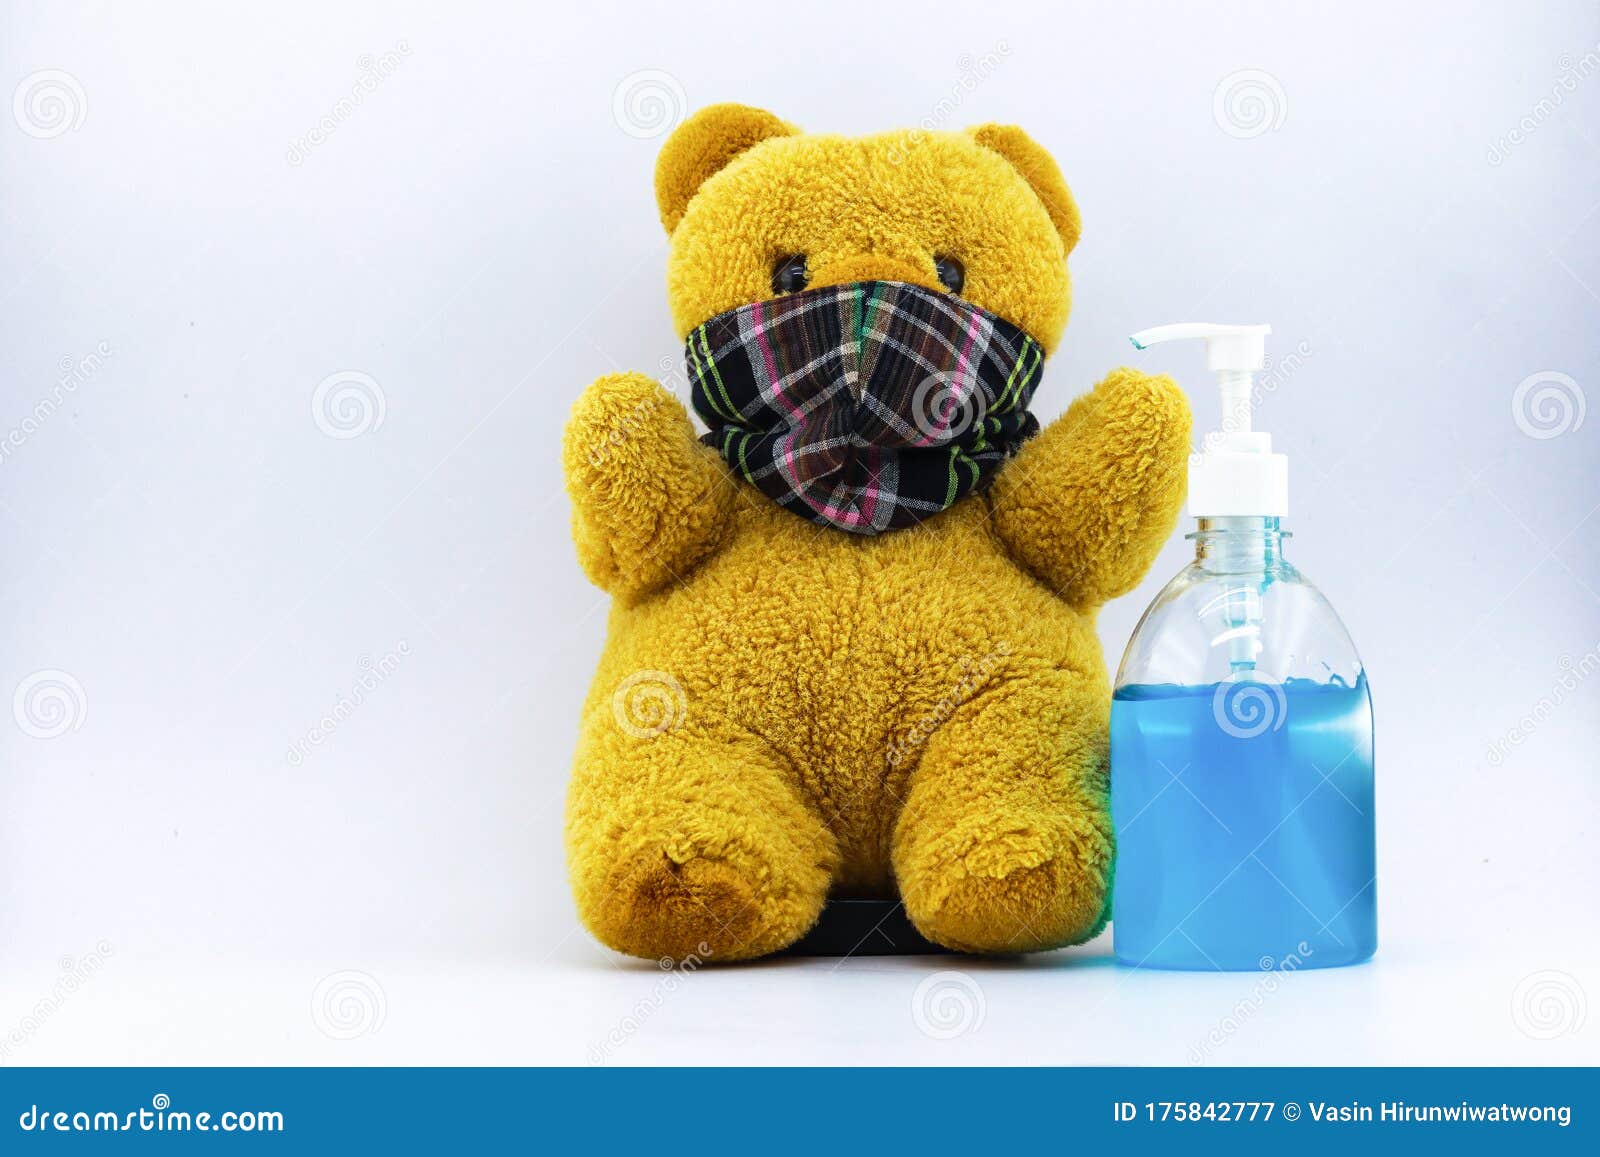 Sanitizing Hand Gel And Teddy Bear Wearing Face Mask Stock Image